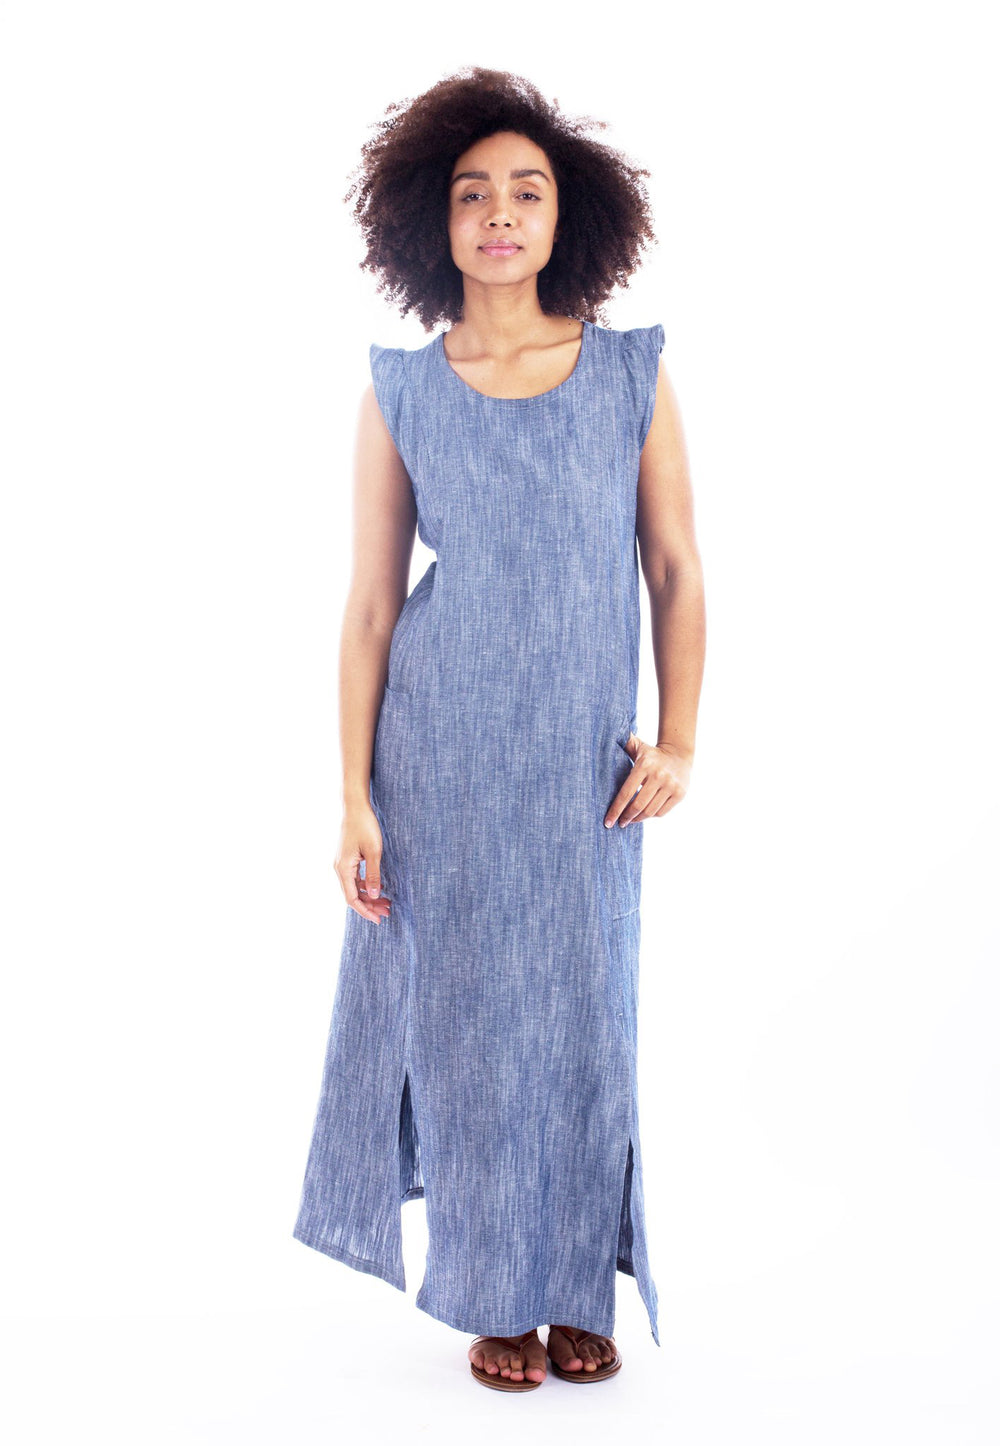 Sew House Seven Montavilla Dress and Top